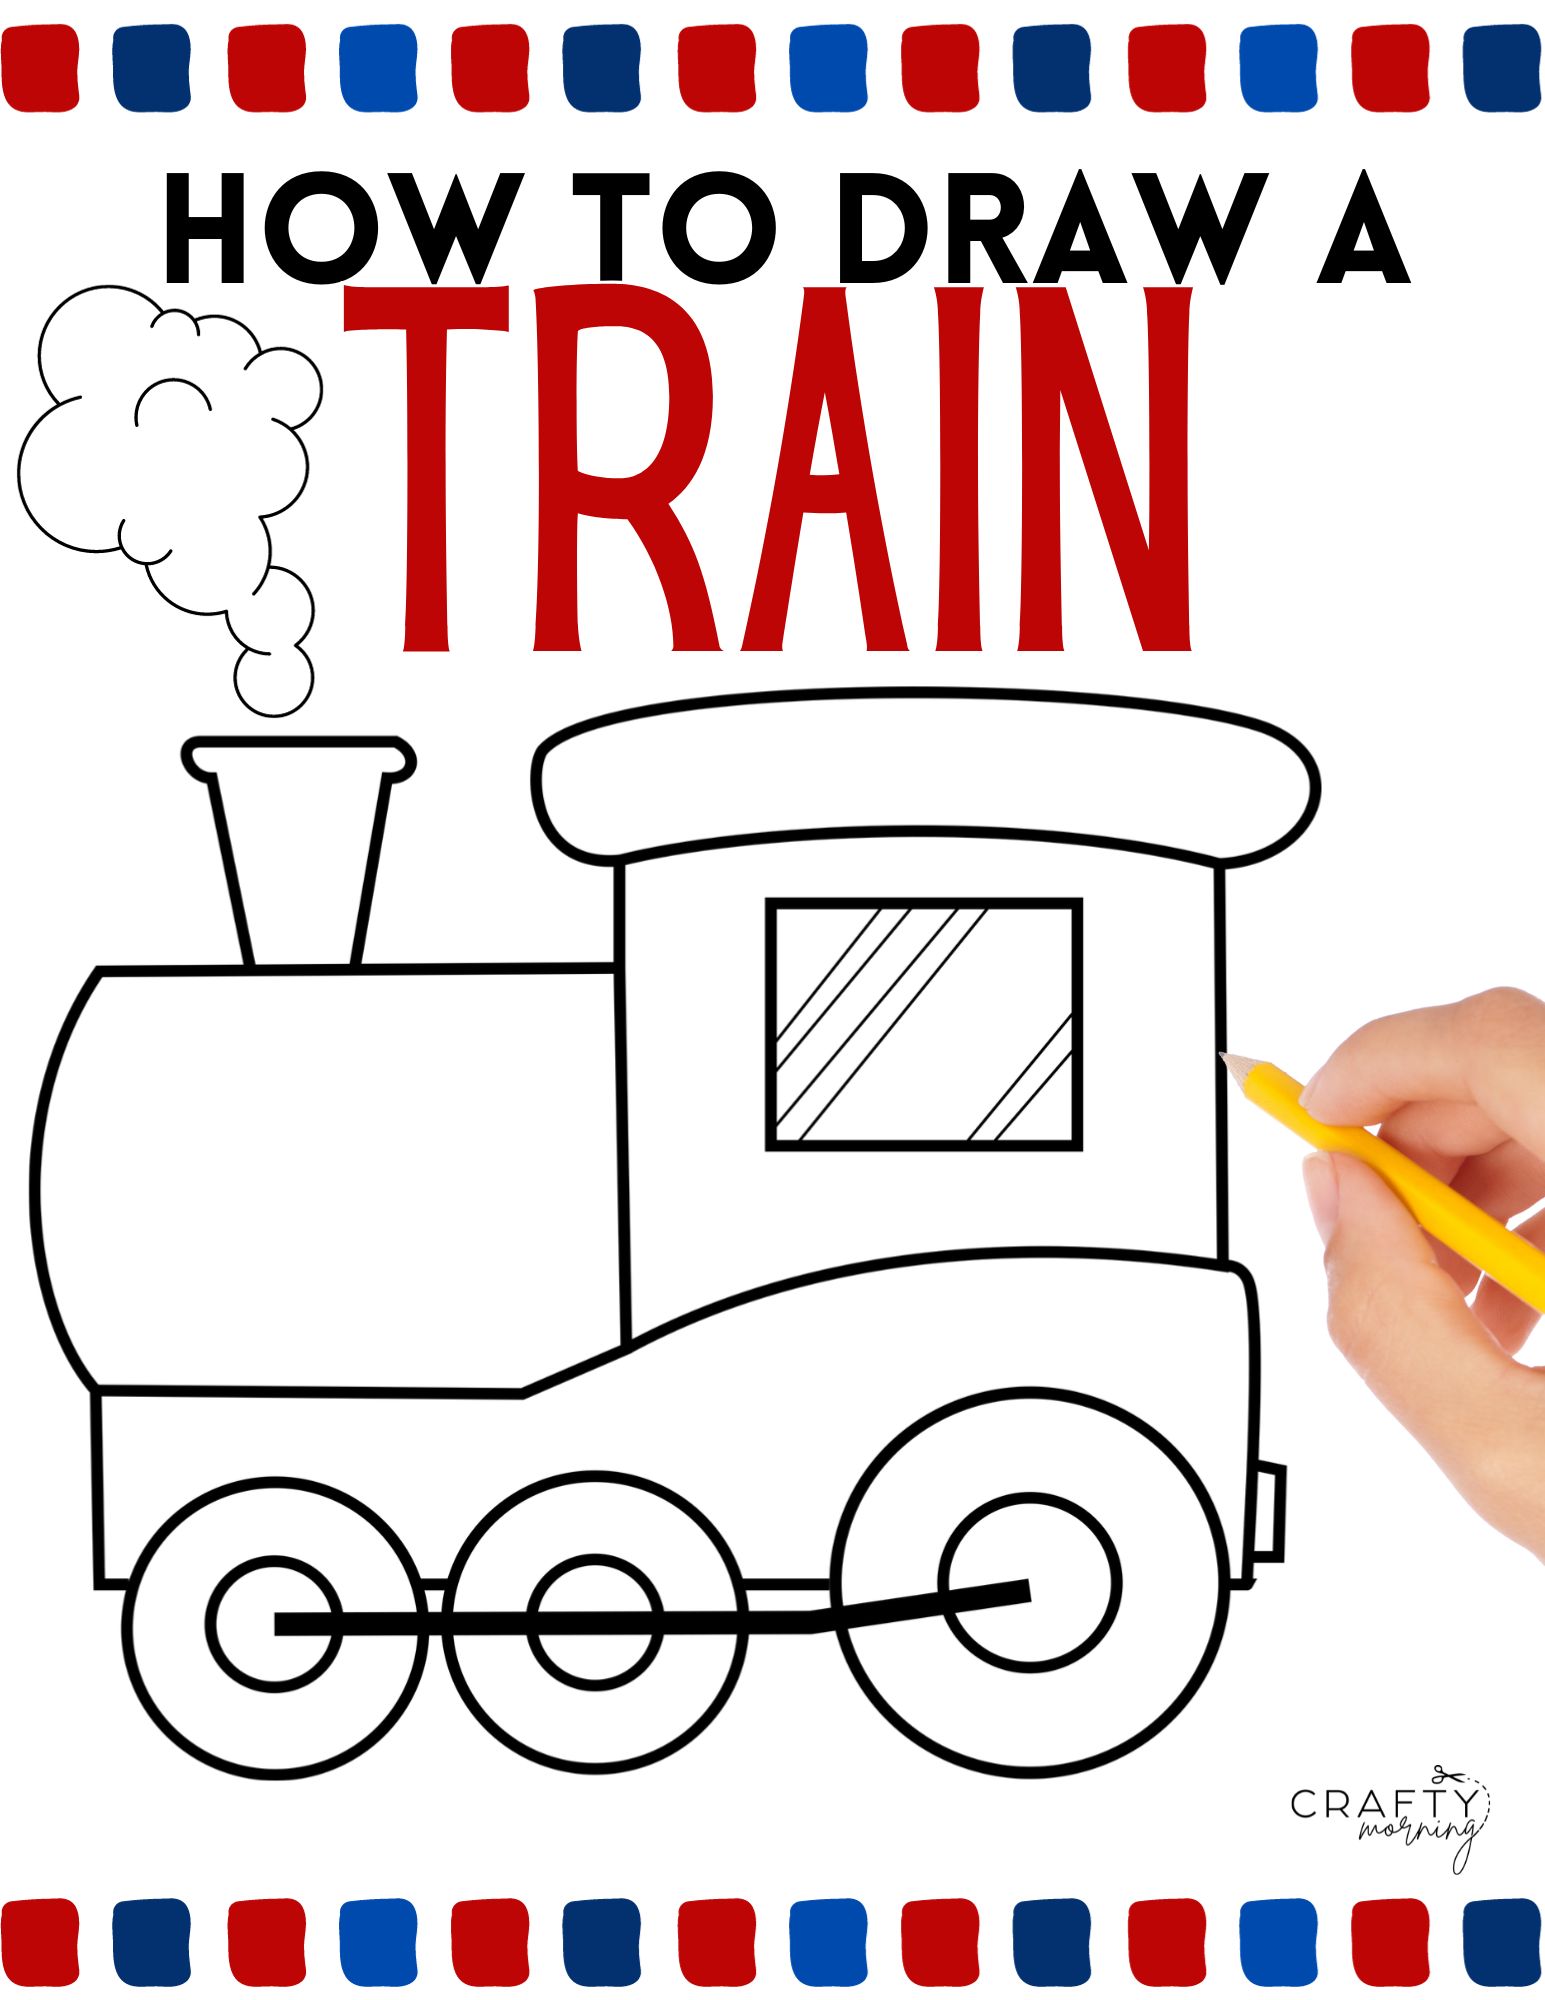 How to draw #train for kids step by step || TRAIN || Great Think Art | Easy  drawings for kids, Drawing for kids, Easy drawings